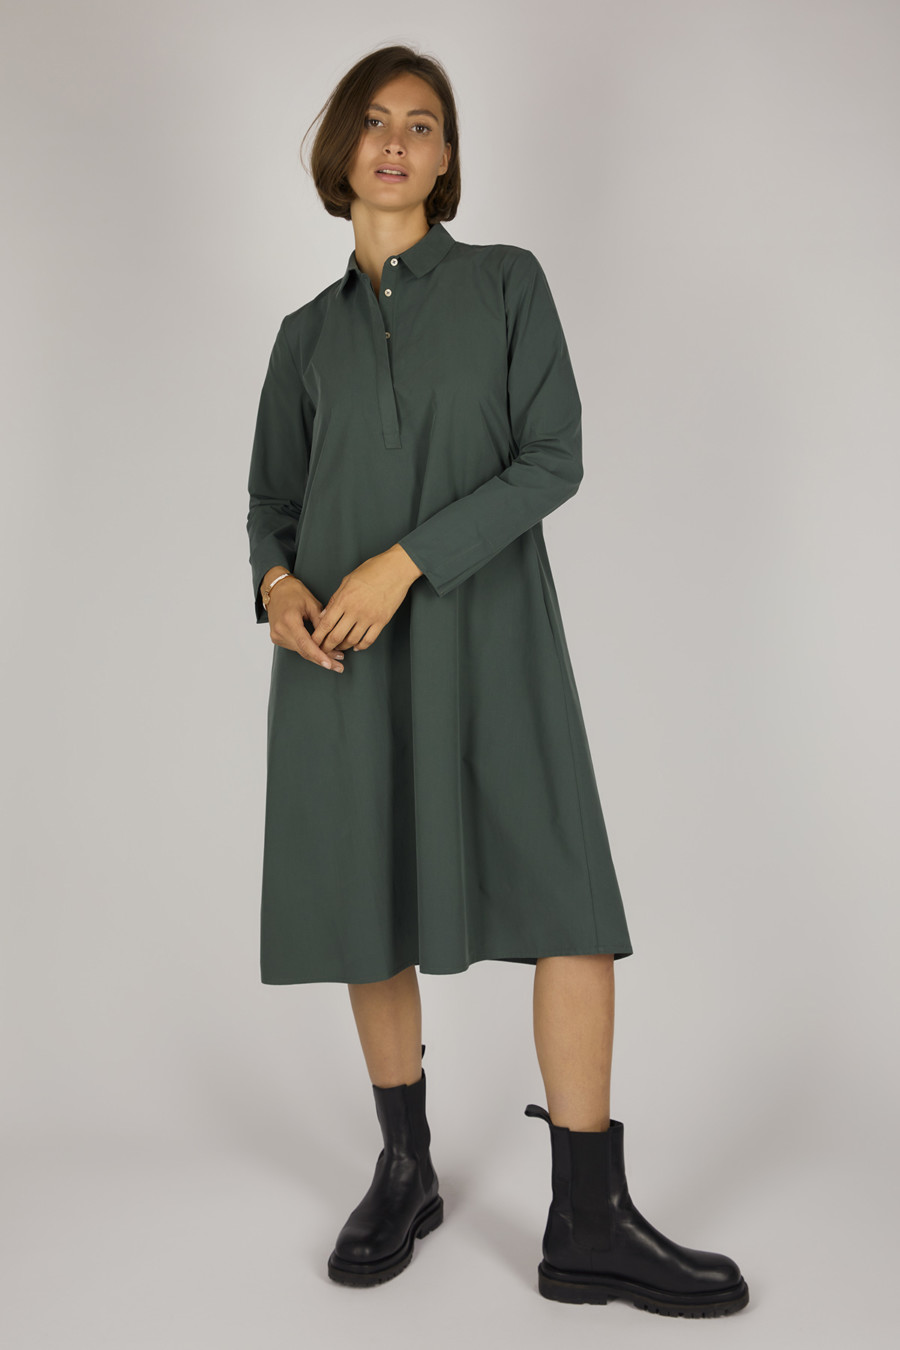 MARGE - Extra Long Shirt Blouse Dress - Color: Moss